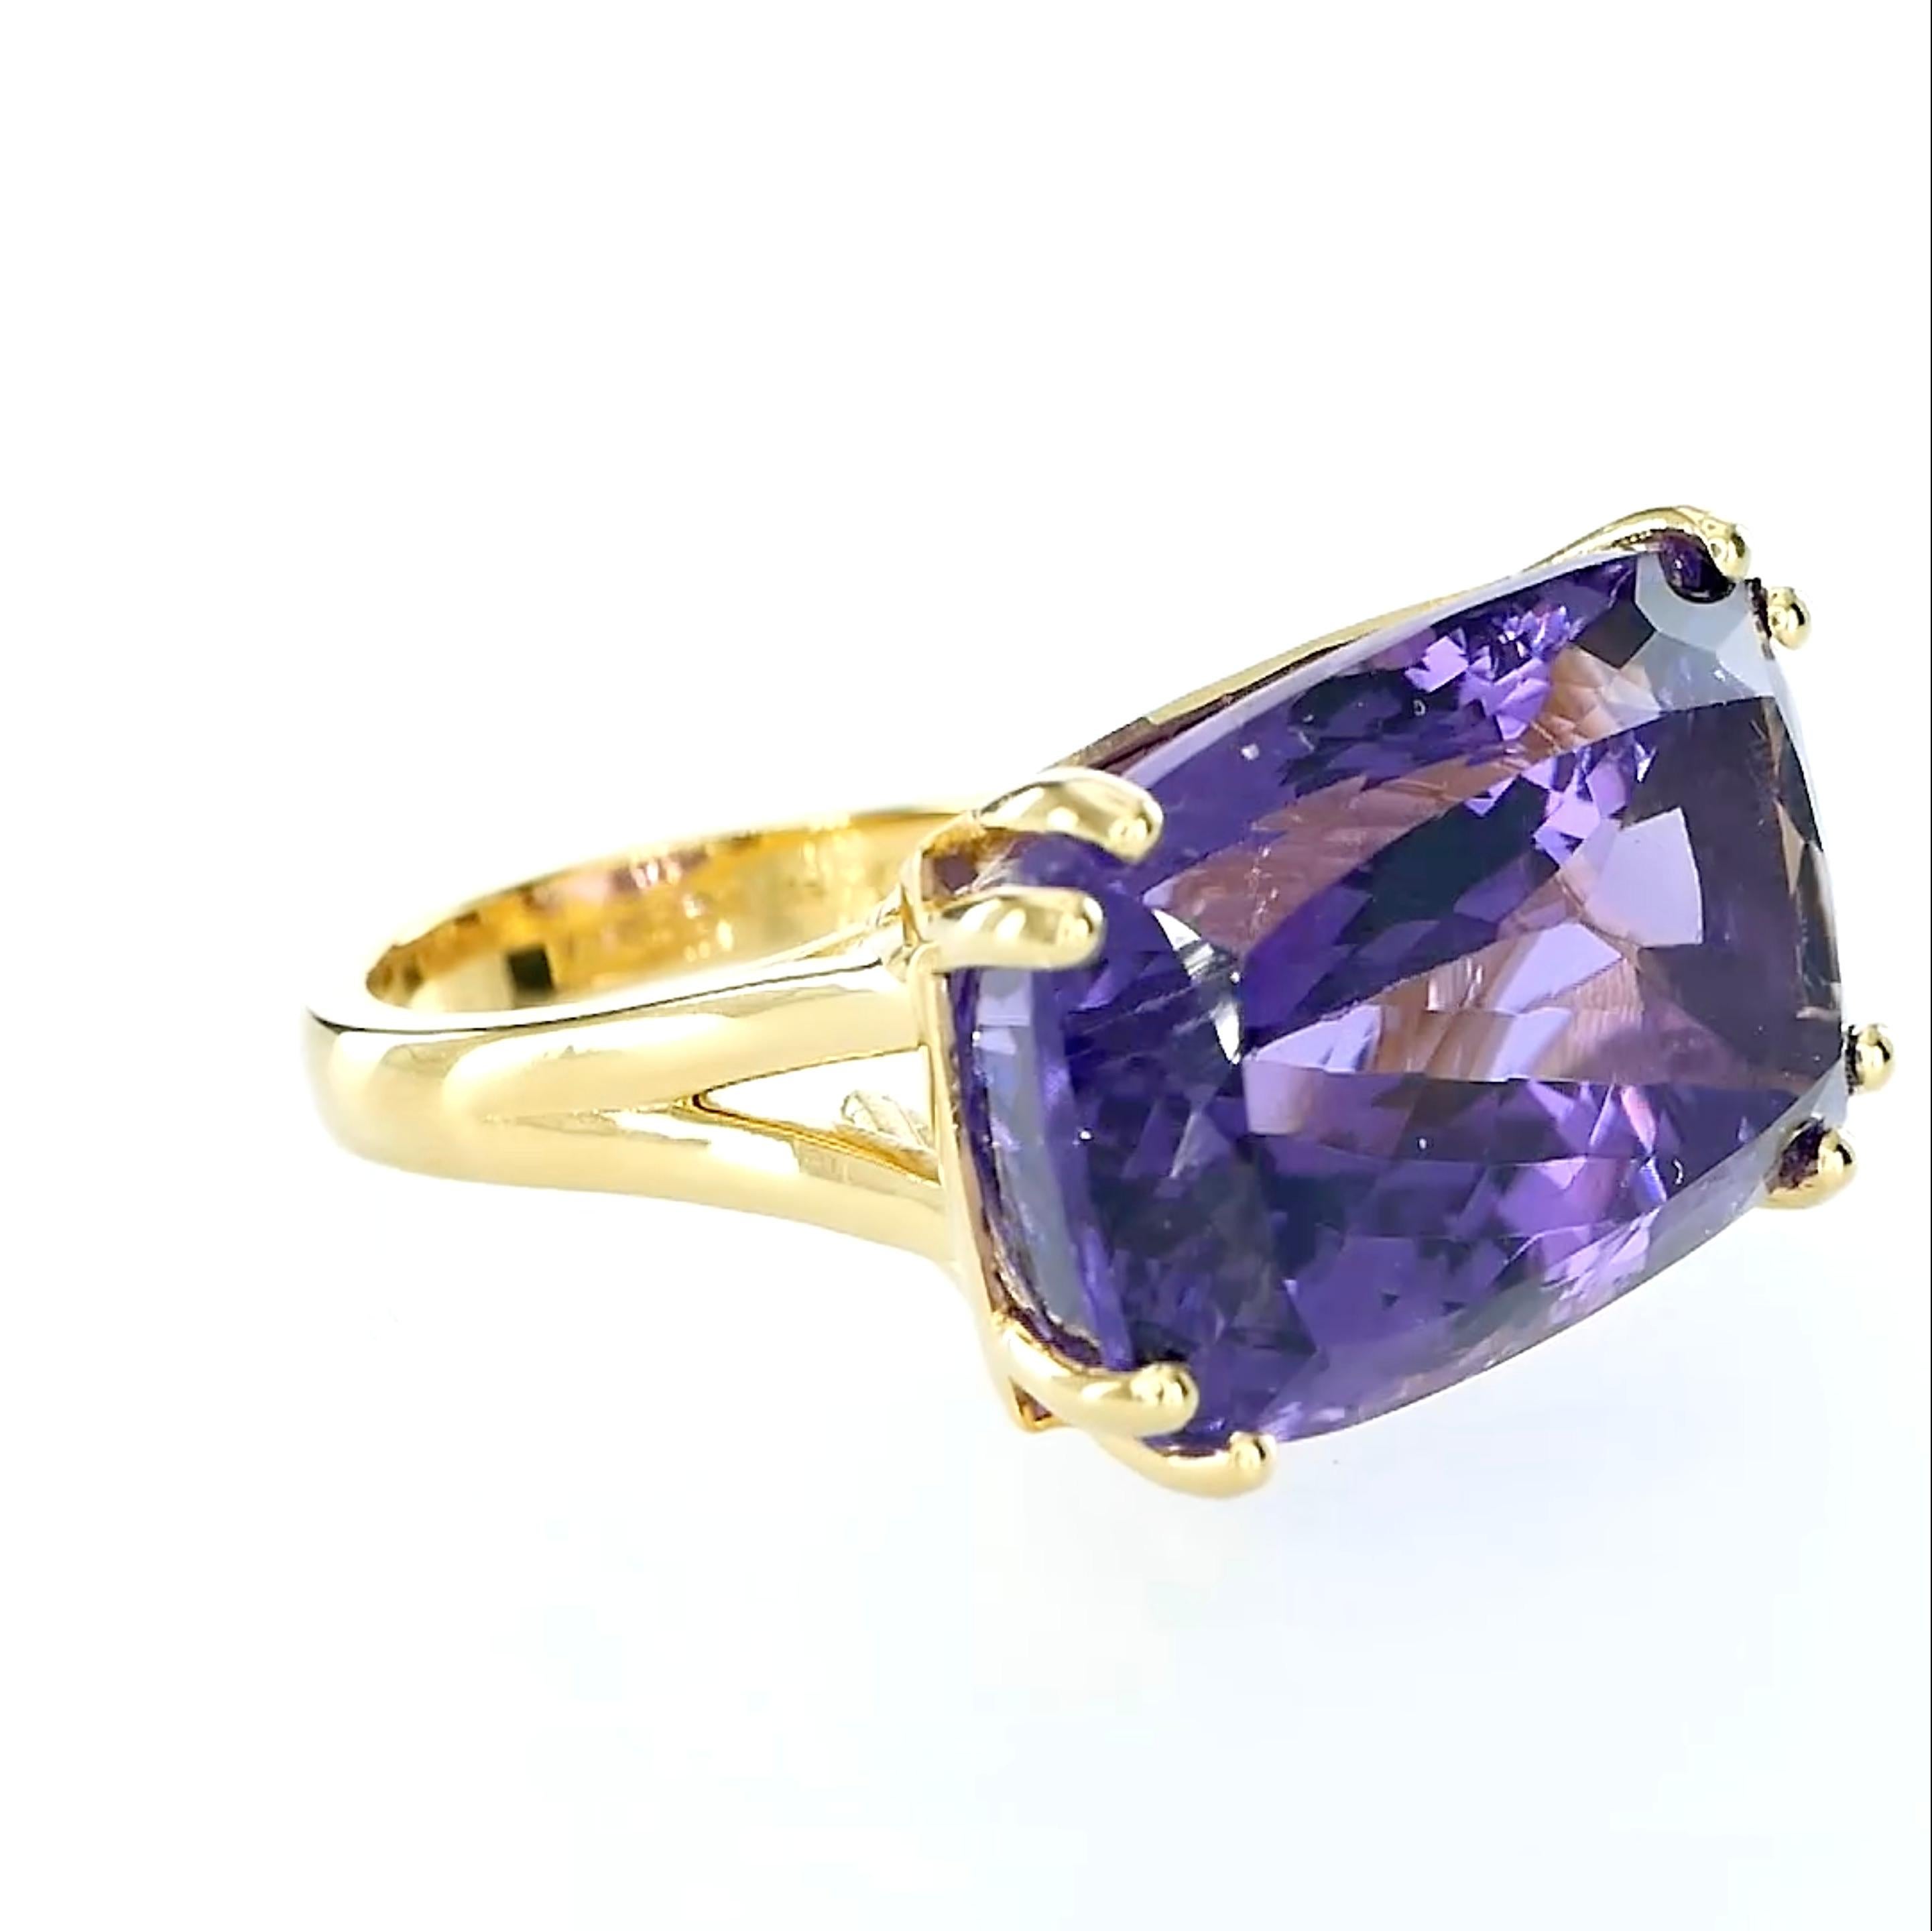 Contemporary Orloff of Denmark, 32.34 ct Amethyst Cocktail Ring in 18K Gold-Plated Silver For Sale